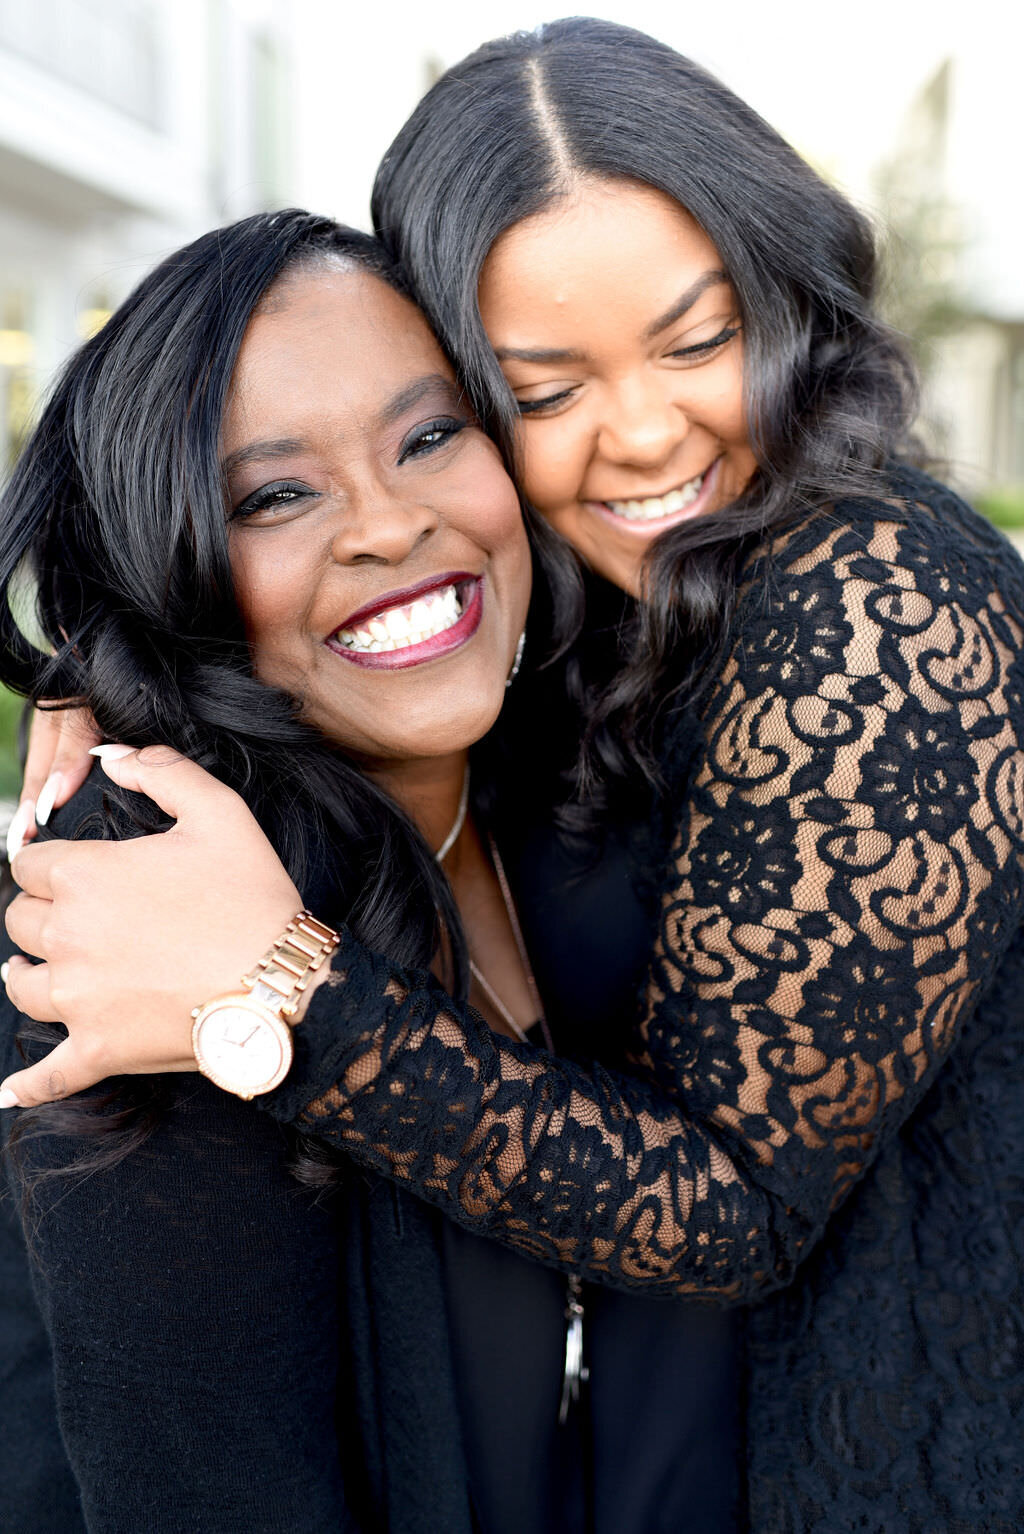 A mother and daughter in a tight hug smiling.